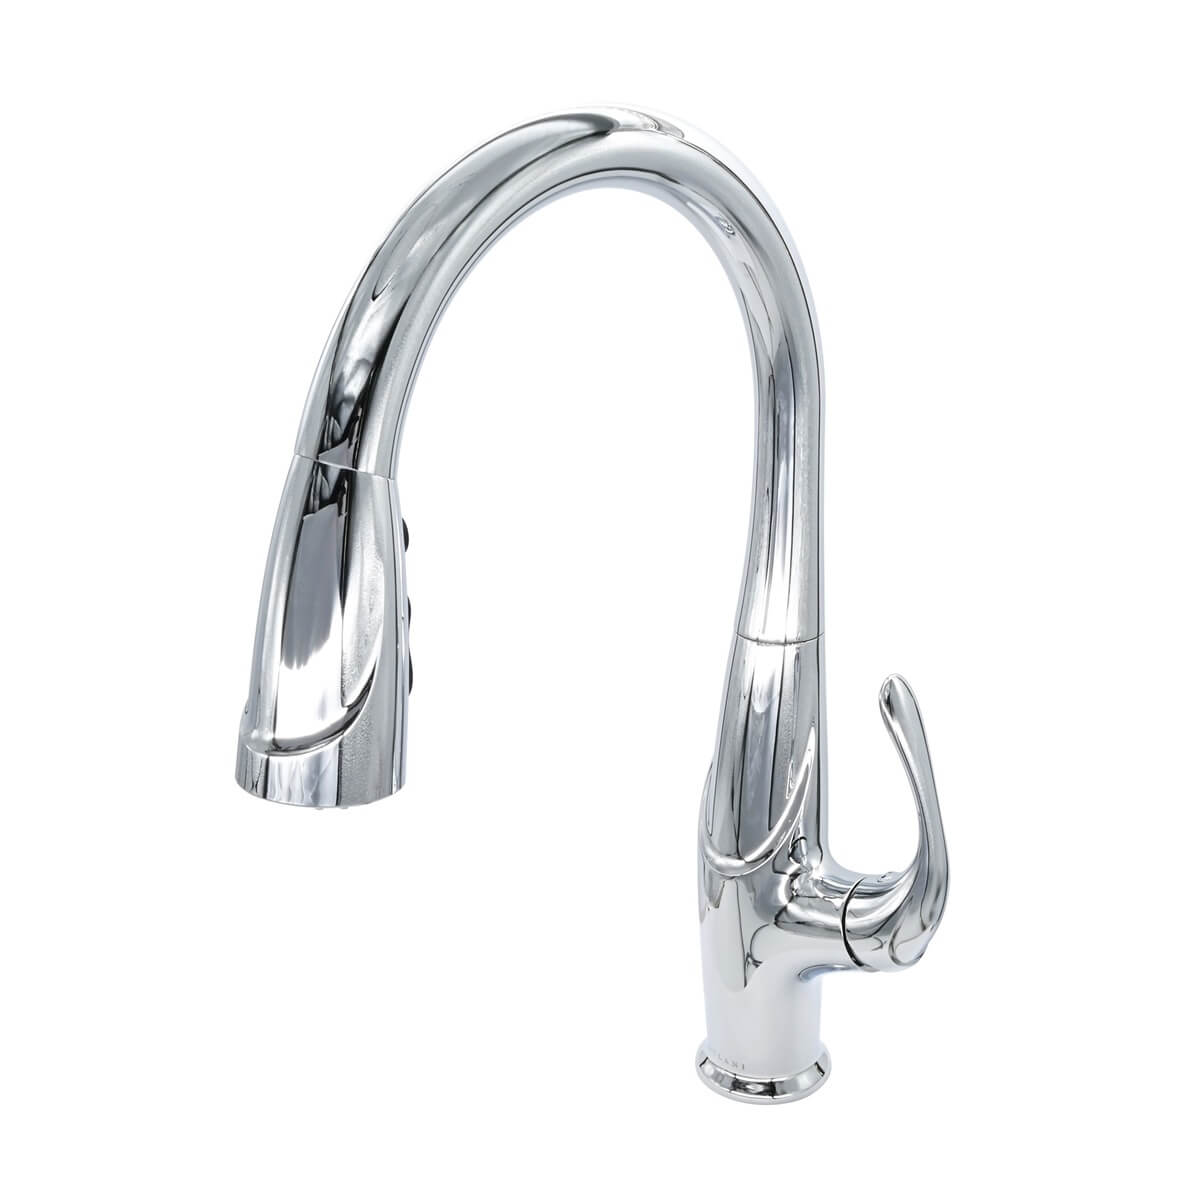 Kauai 1 Handle Swivel Pull-Down Kitchen Faucet Includes Baseplate